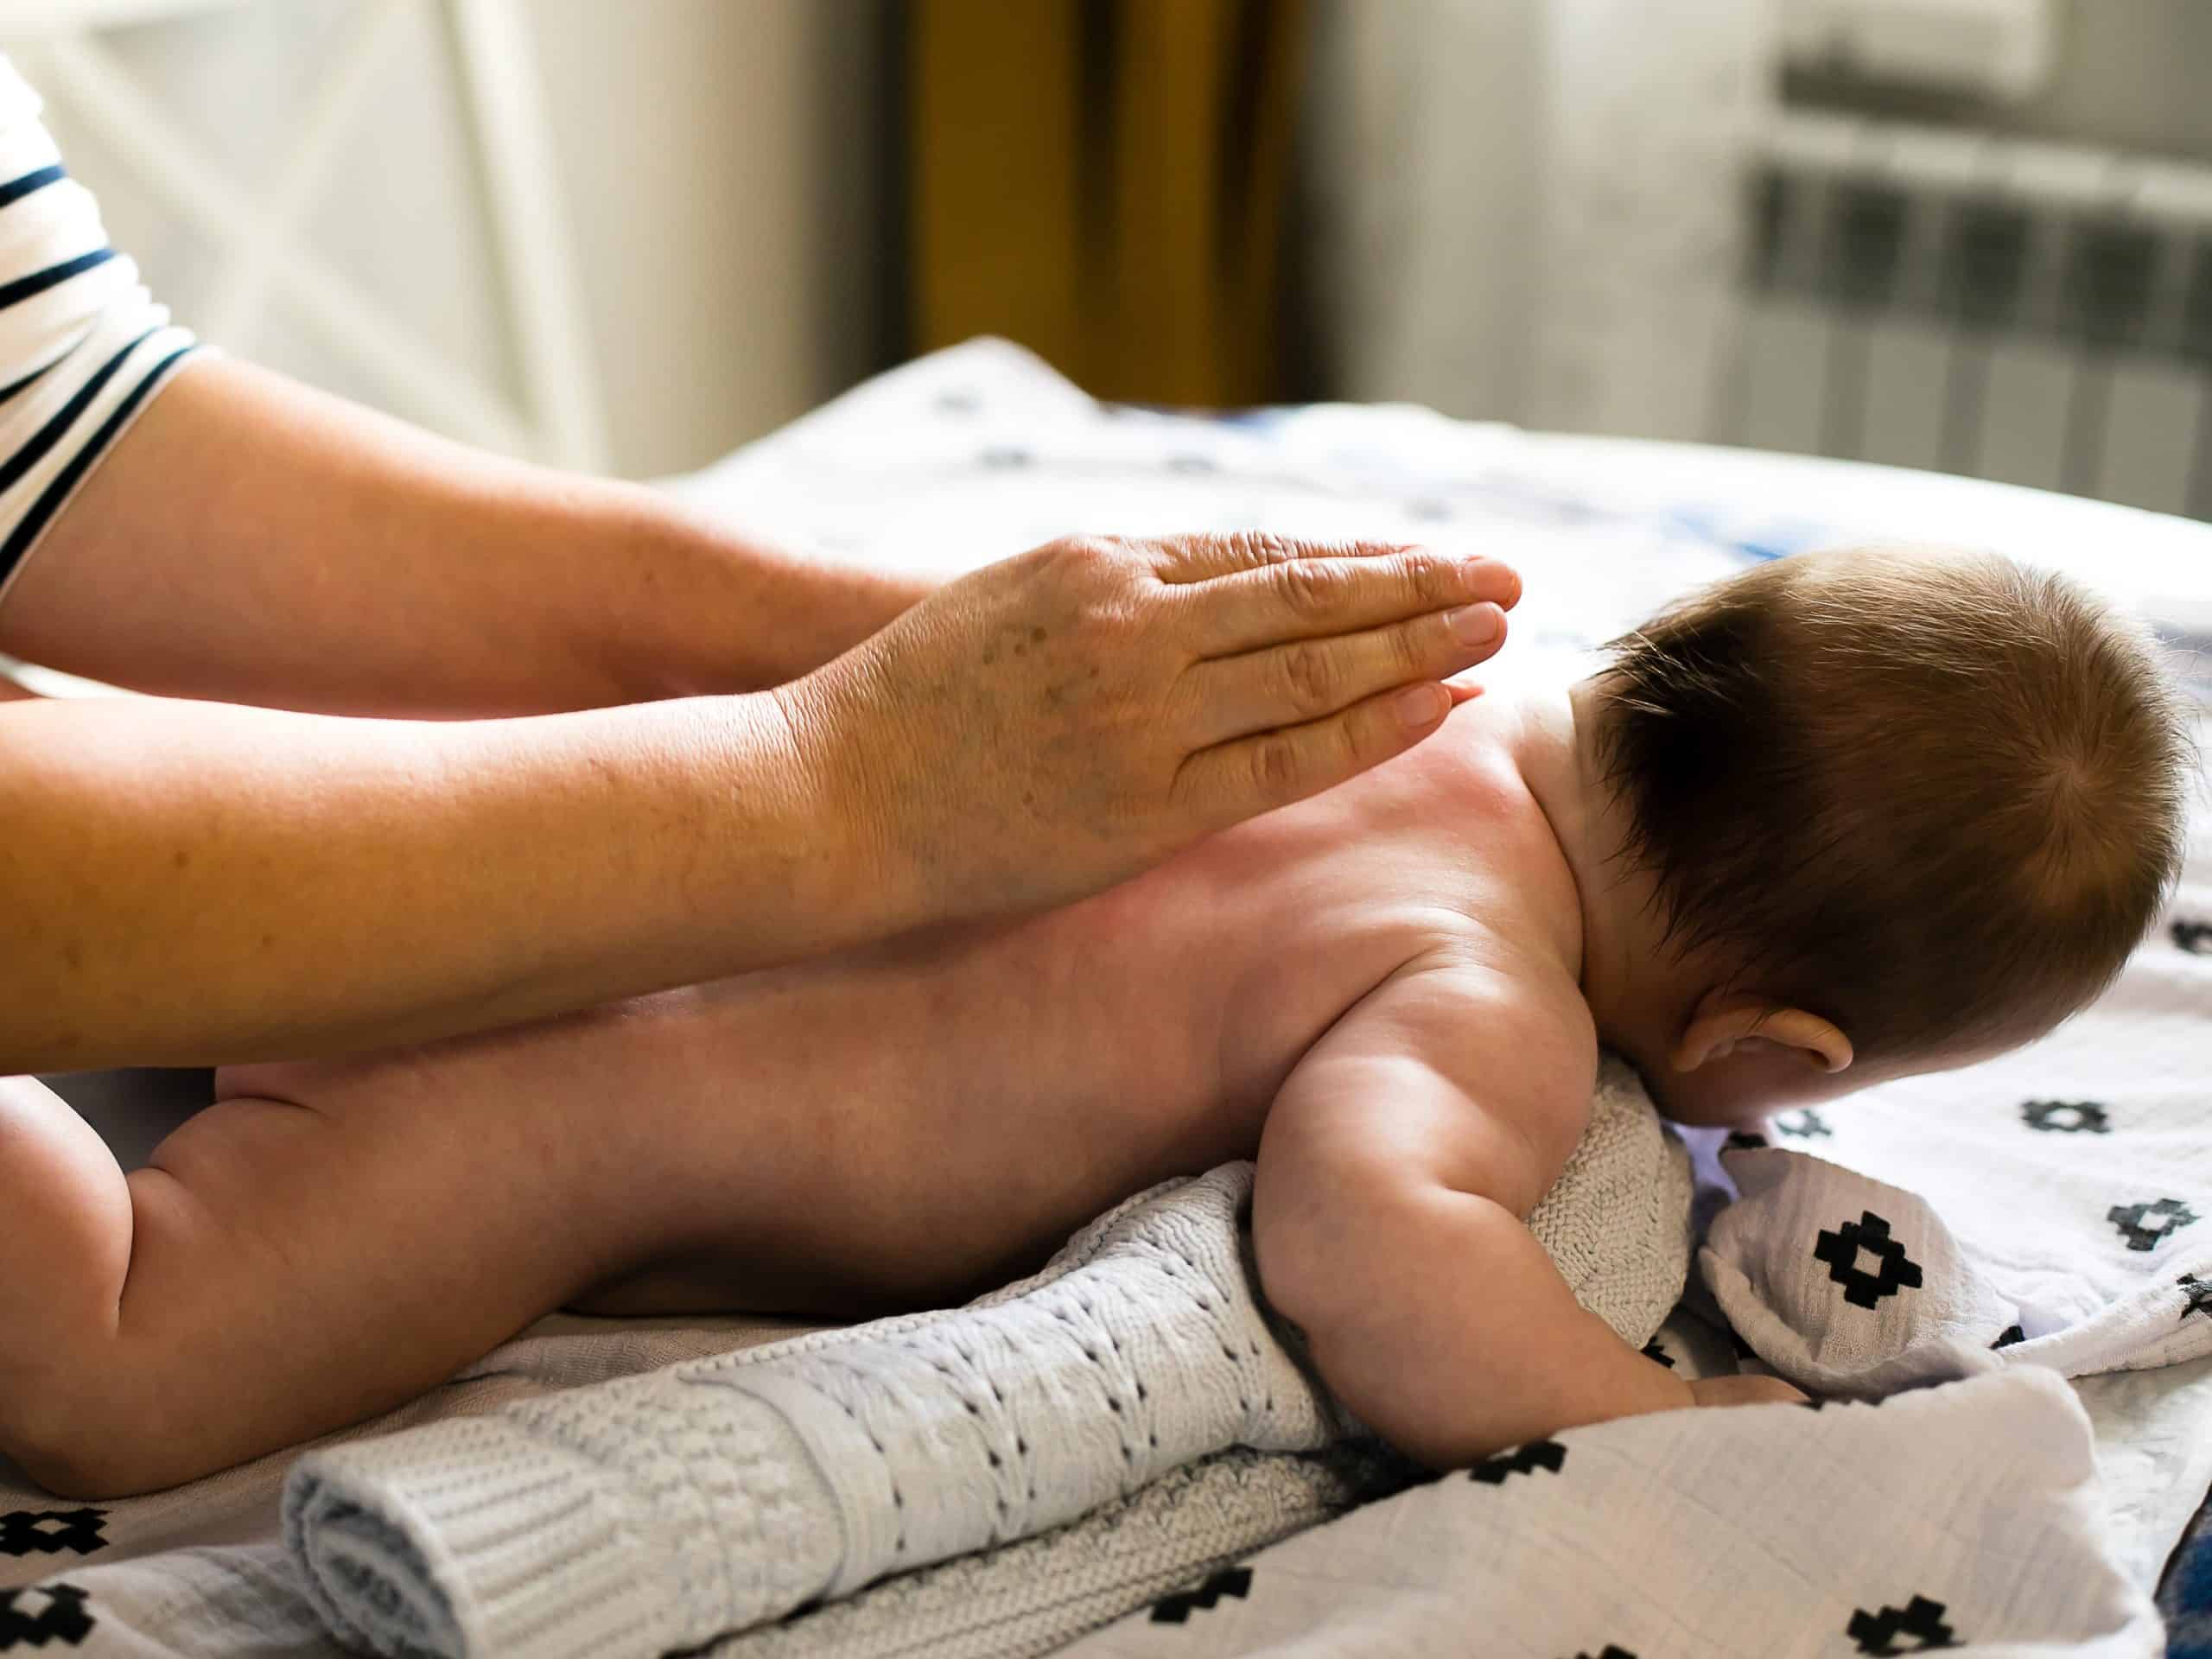 Mother makes newborn baby massage apply oil on the hand.